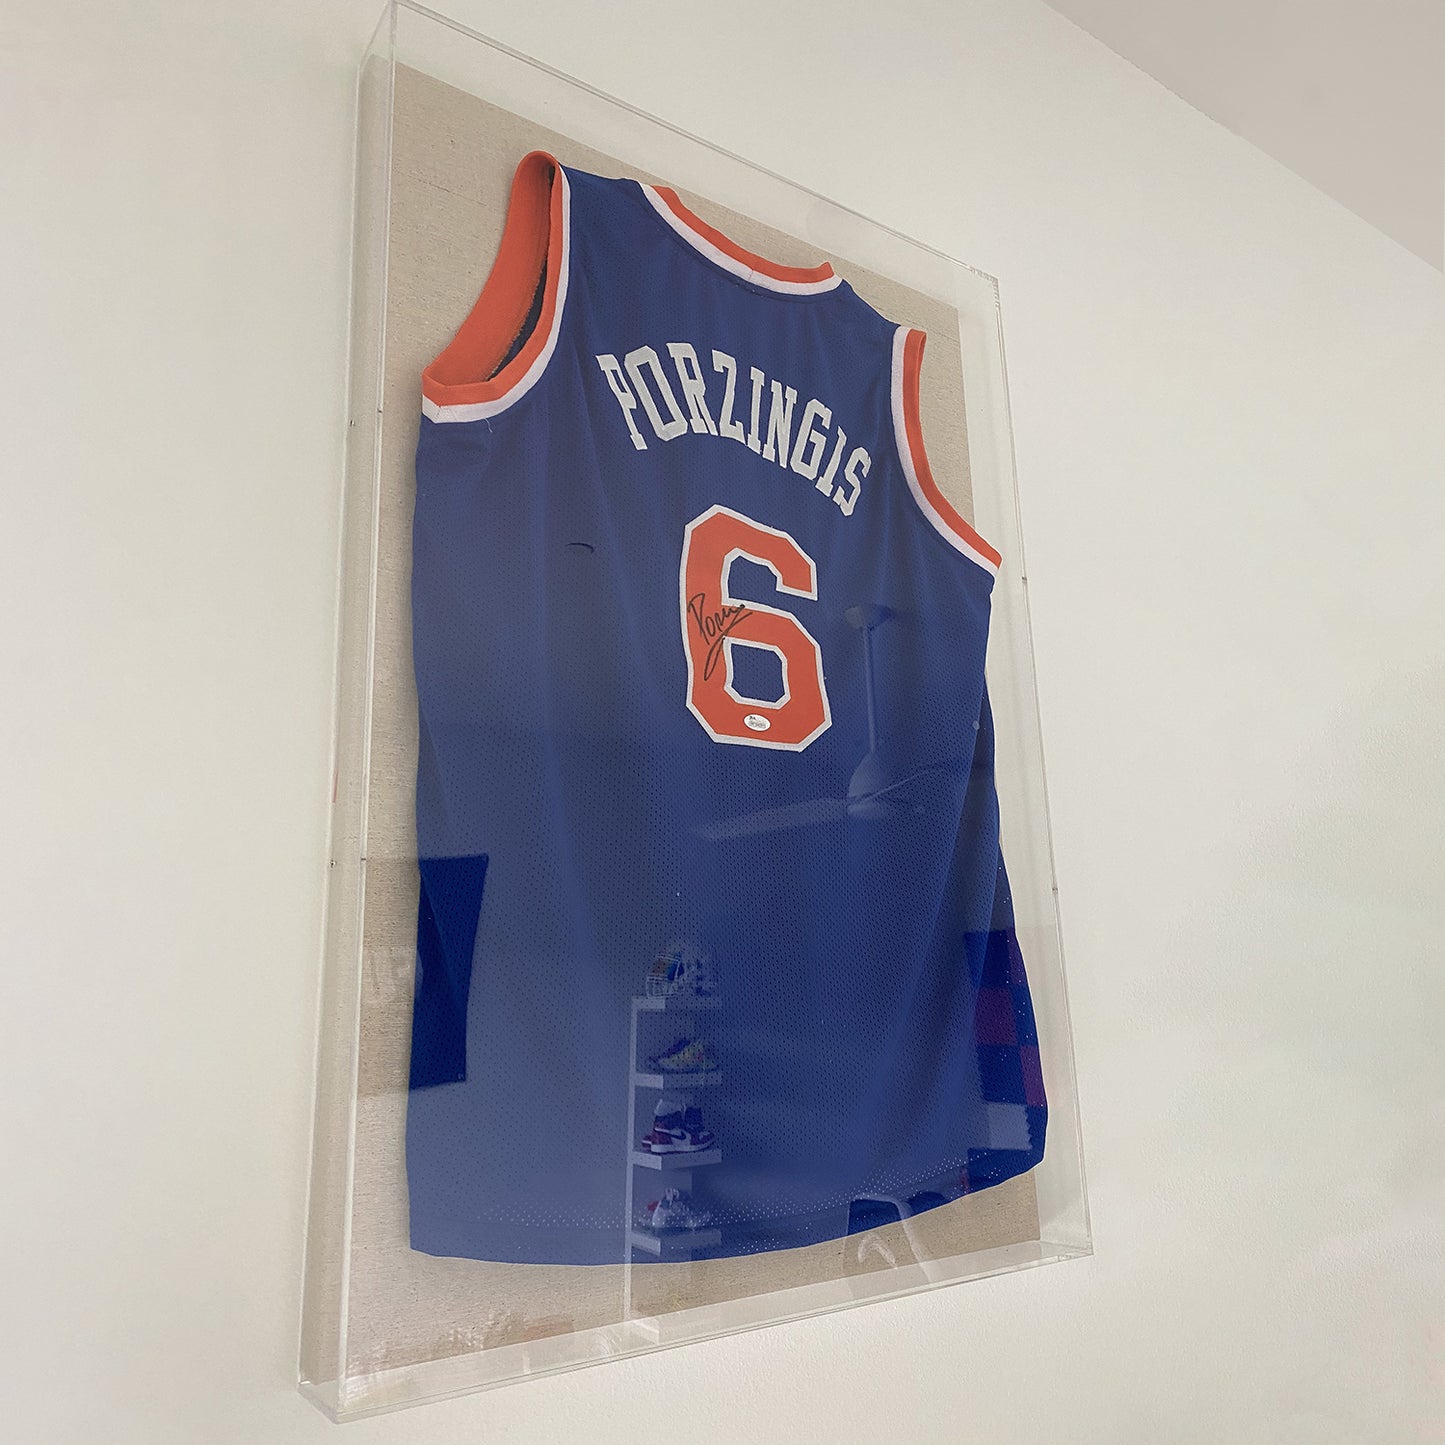 Jersey Shadowbox Display for Athletes & Sports Fans